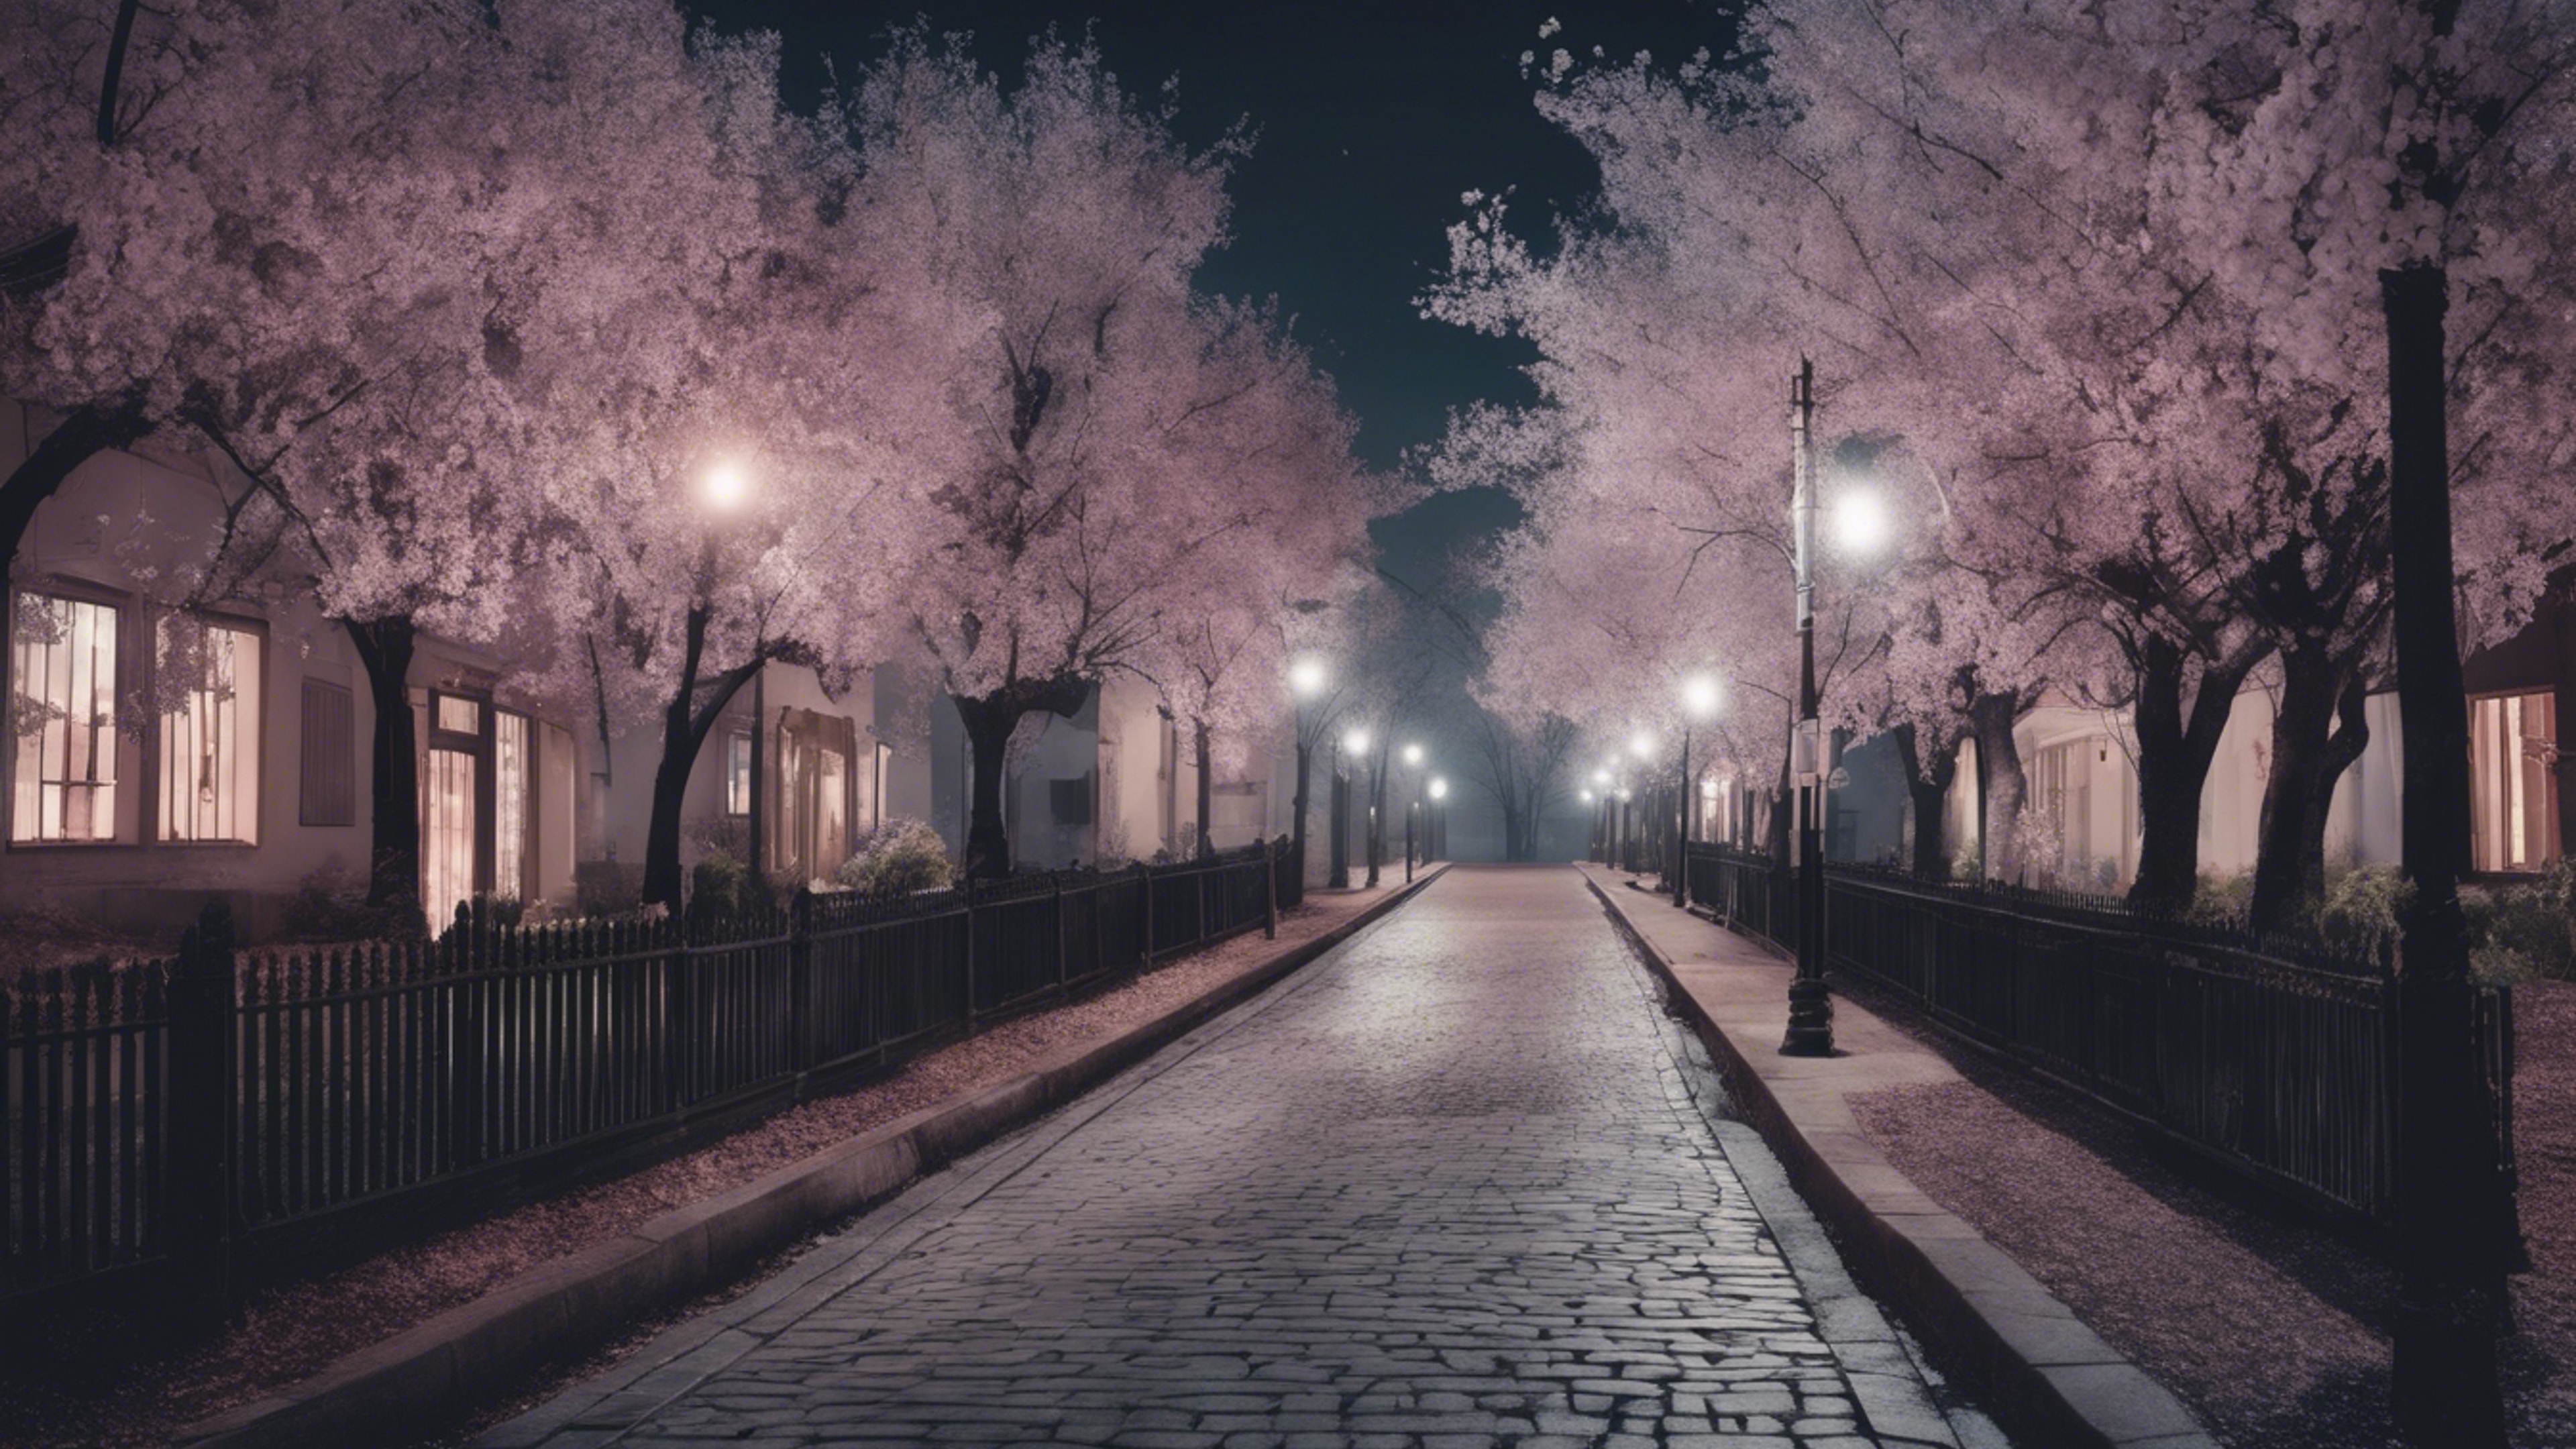 Pastel gothic street lined with black blossom trees under the ghostly night sky. Обои[dc1e1b7f0a0c4838b6b6]